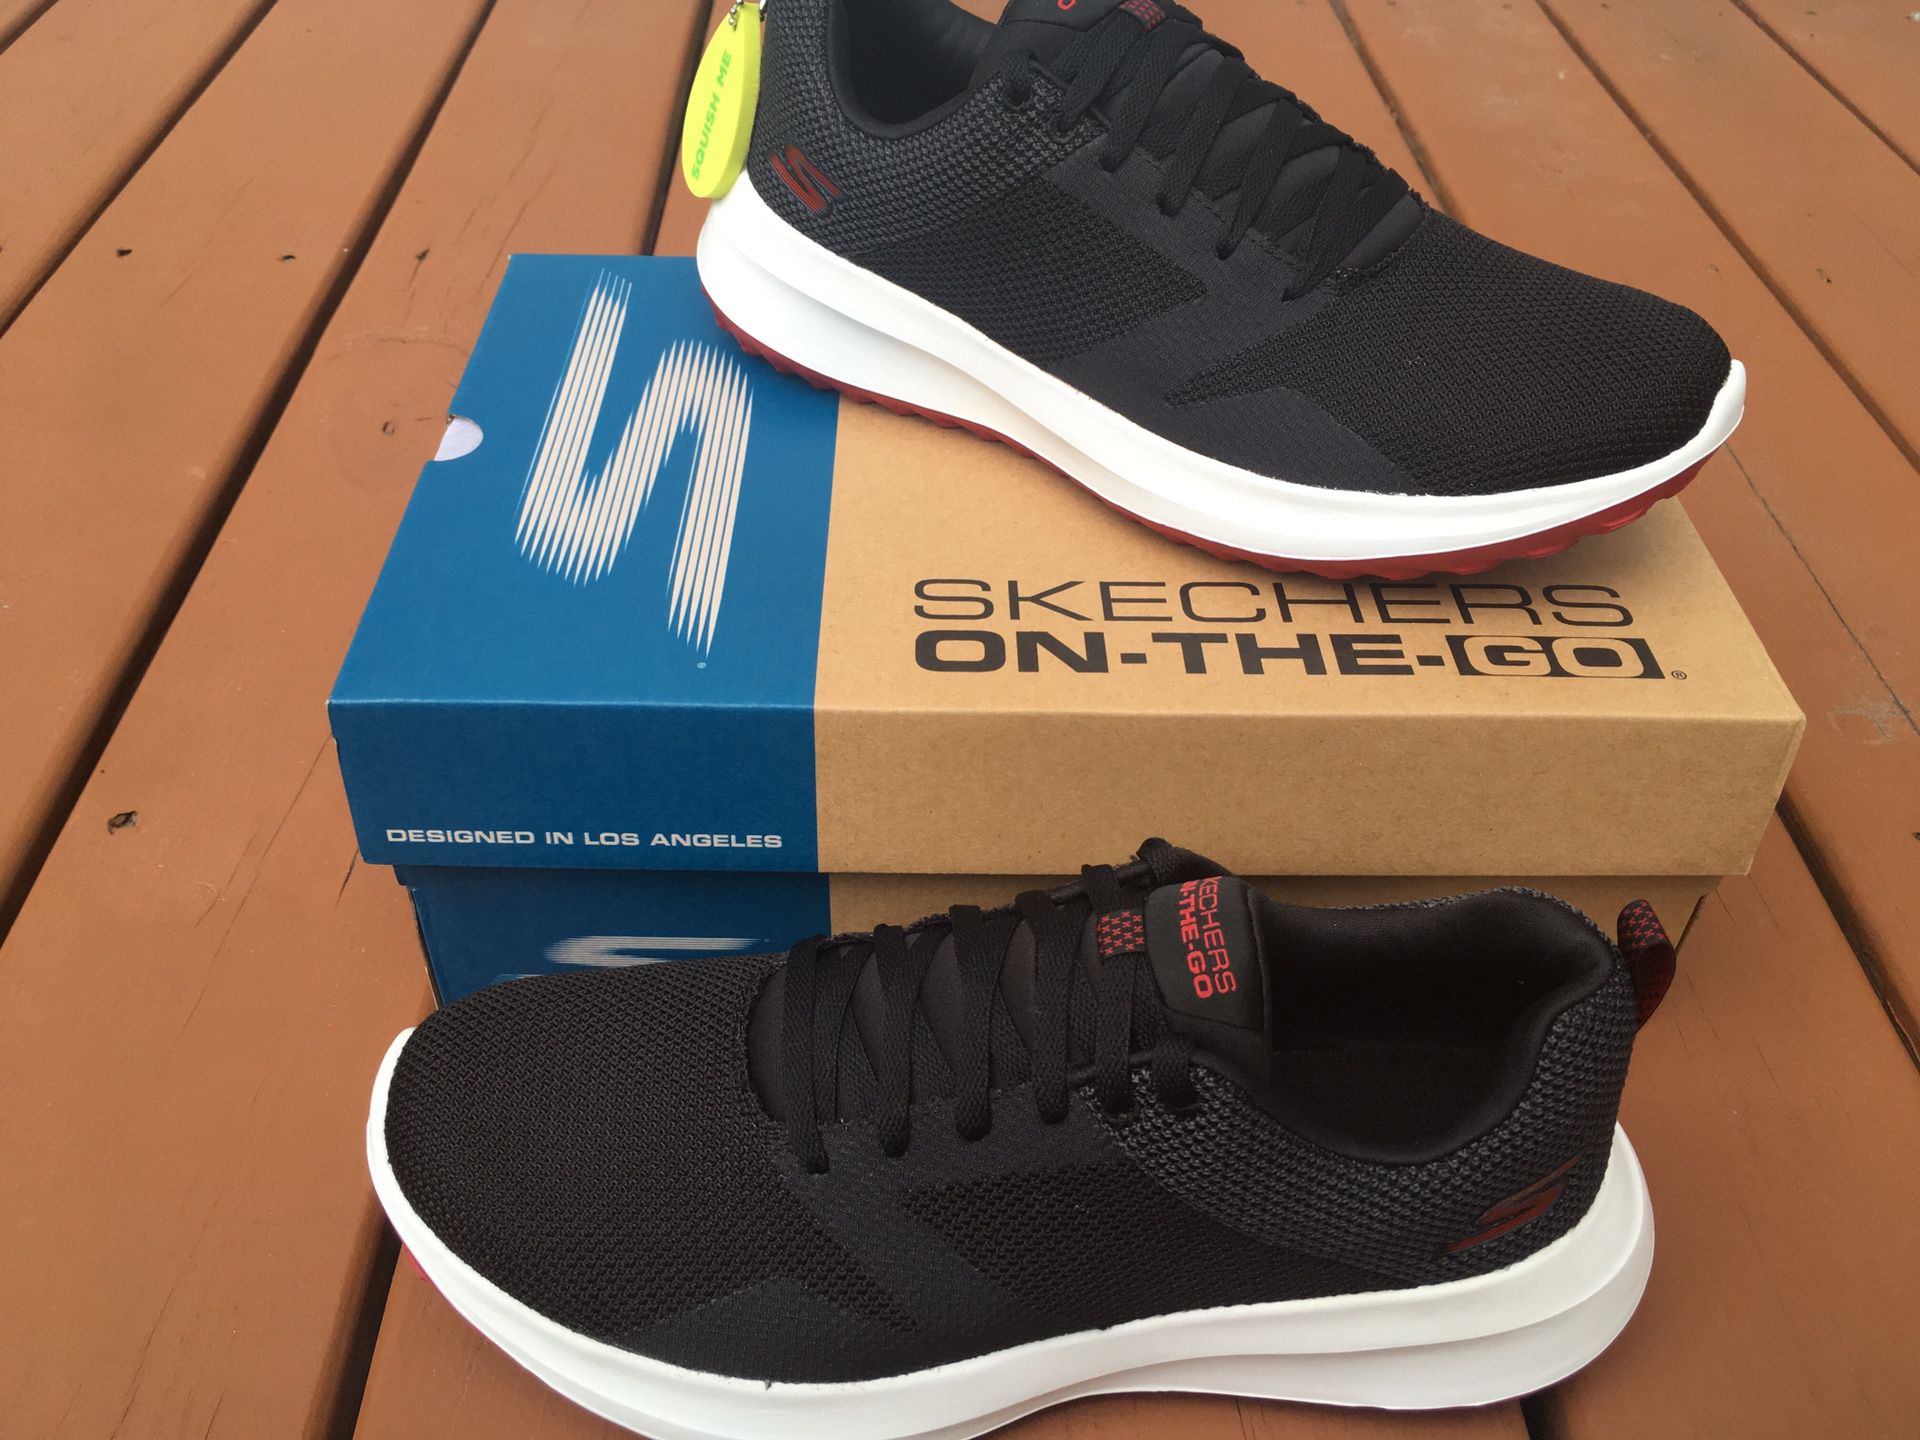 Skechers ON-THE-GO City 4.0 for Sale in Bon Air, VA - OfferUp